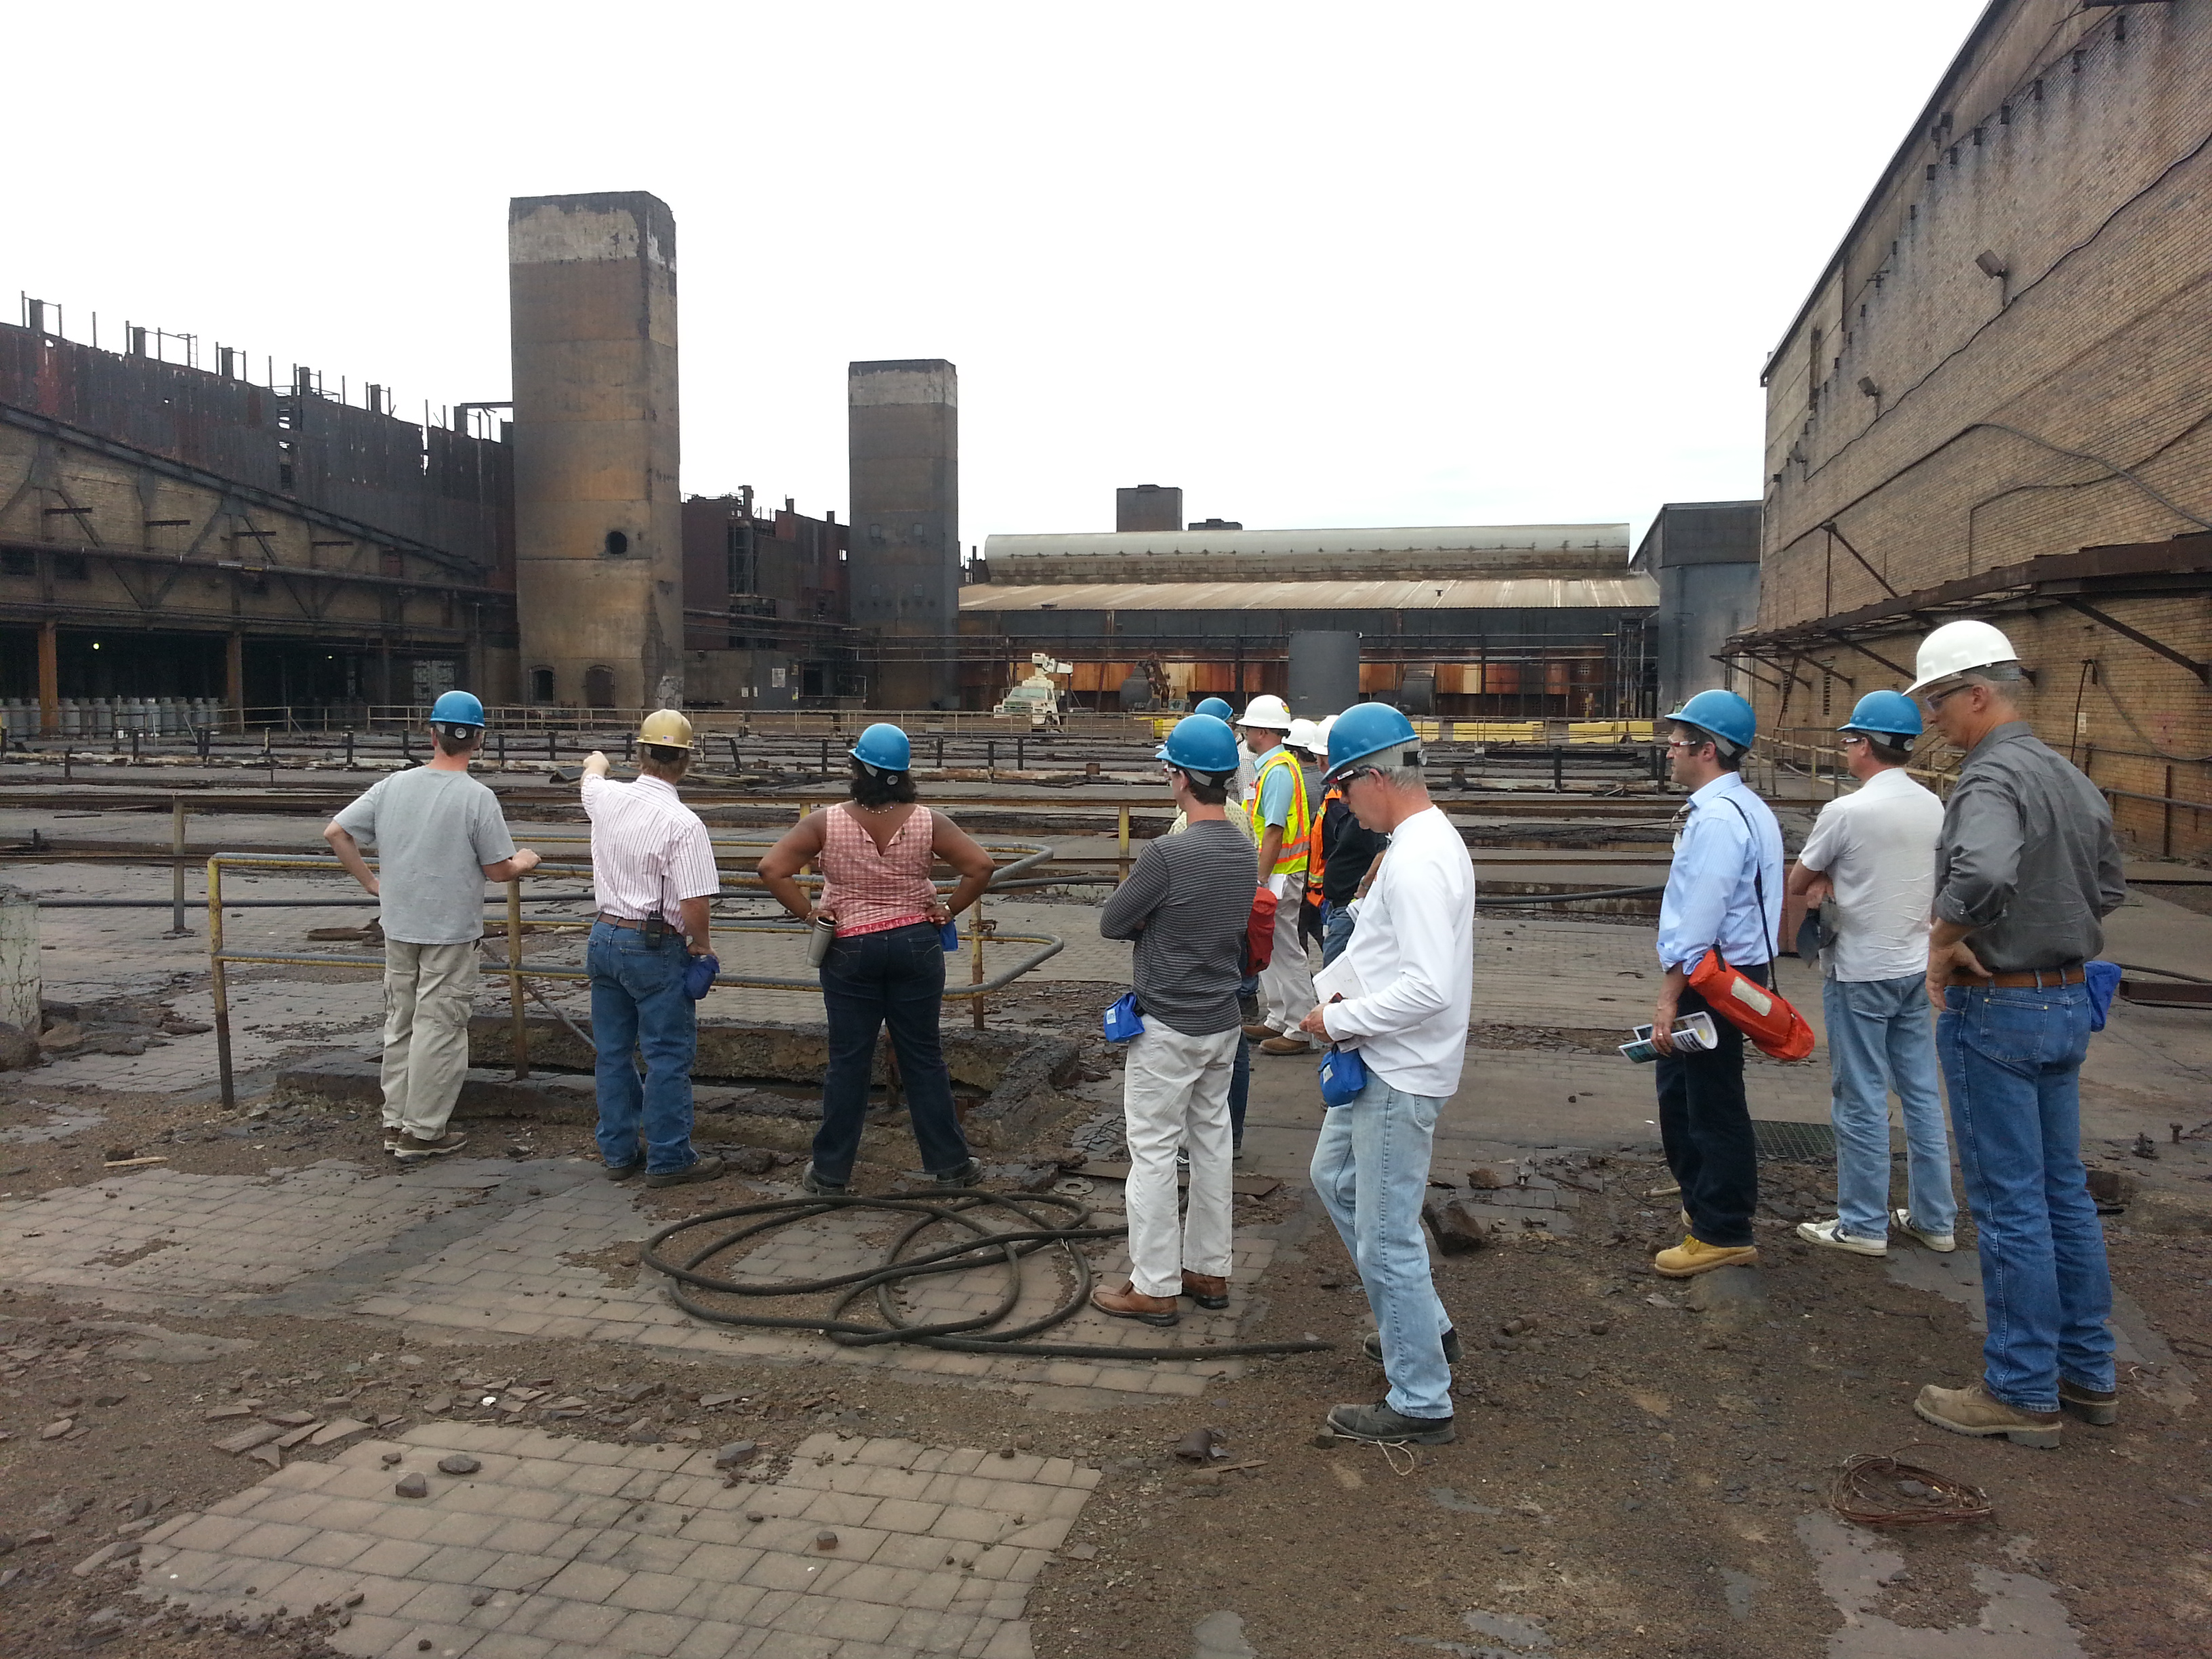 10 people tour an abandoned industrial site in the BMI complex